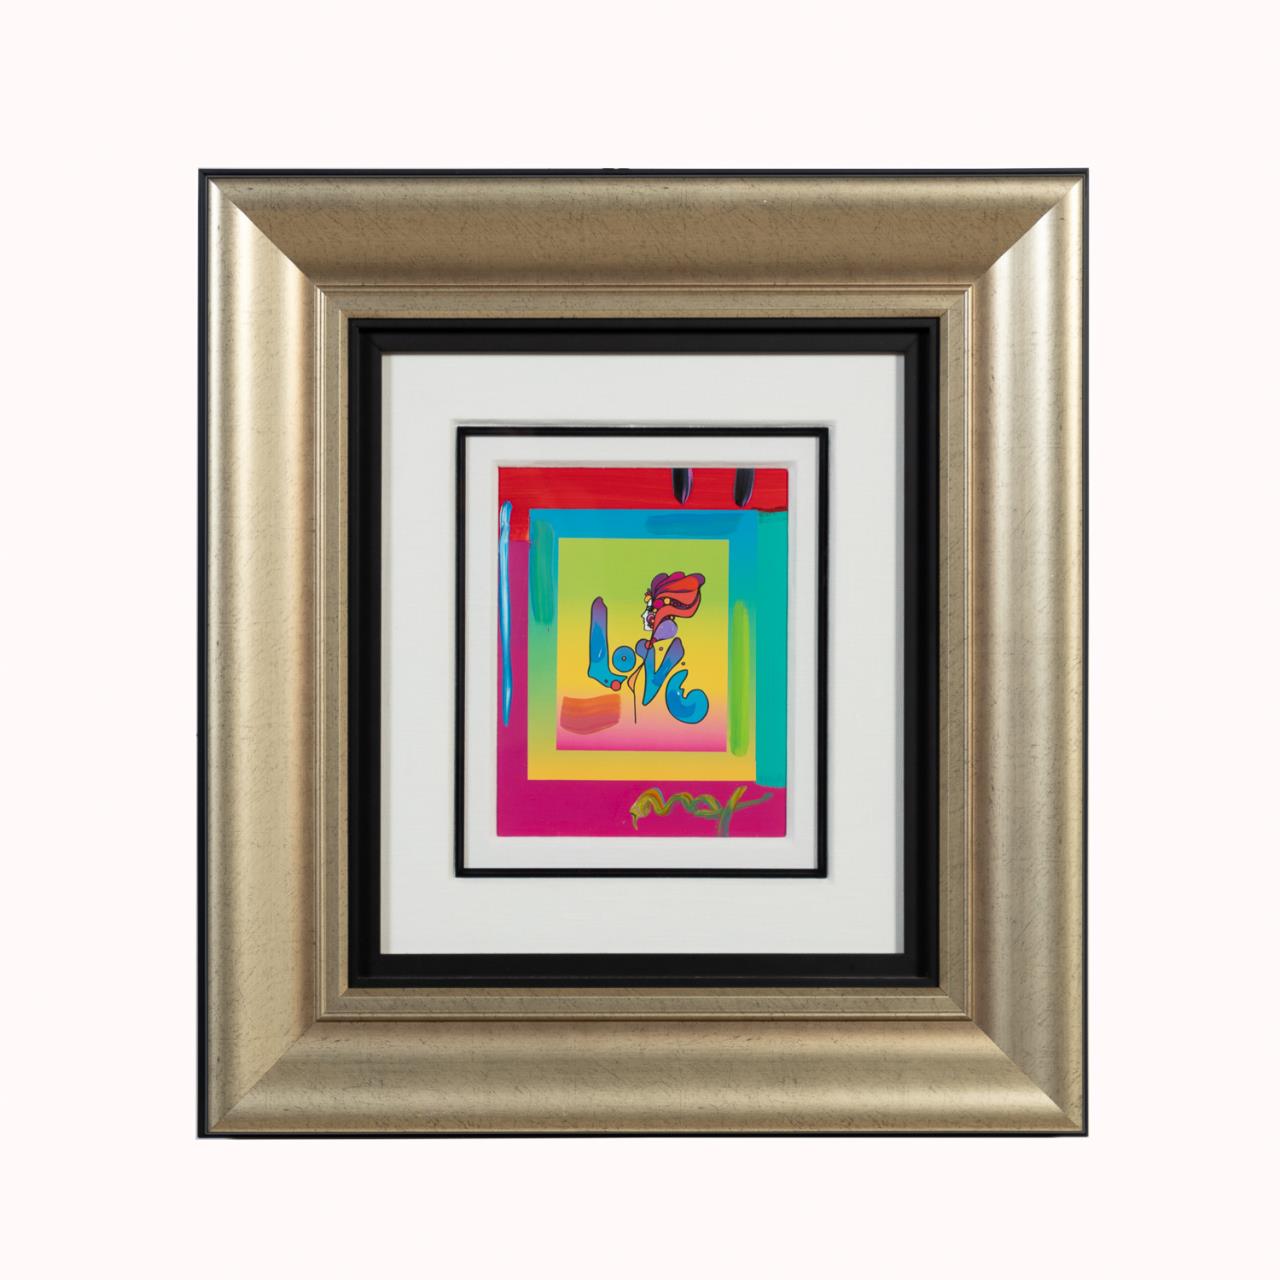 PETER MAX "LOVE ON BLENDS" MM ON